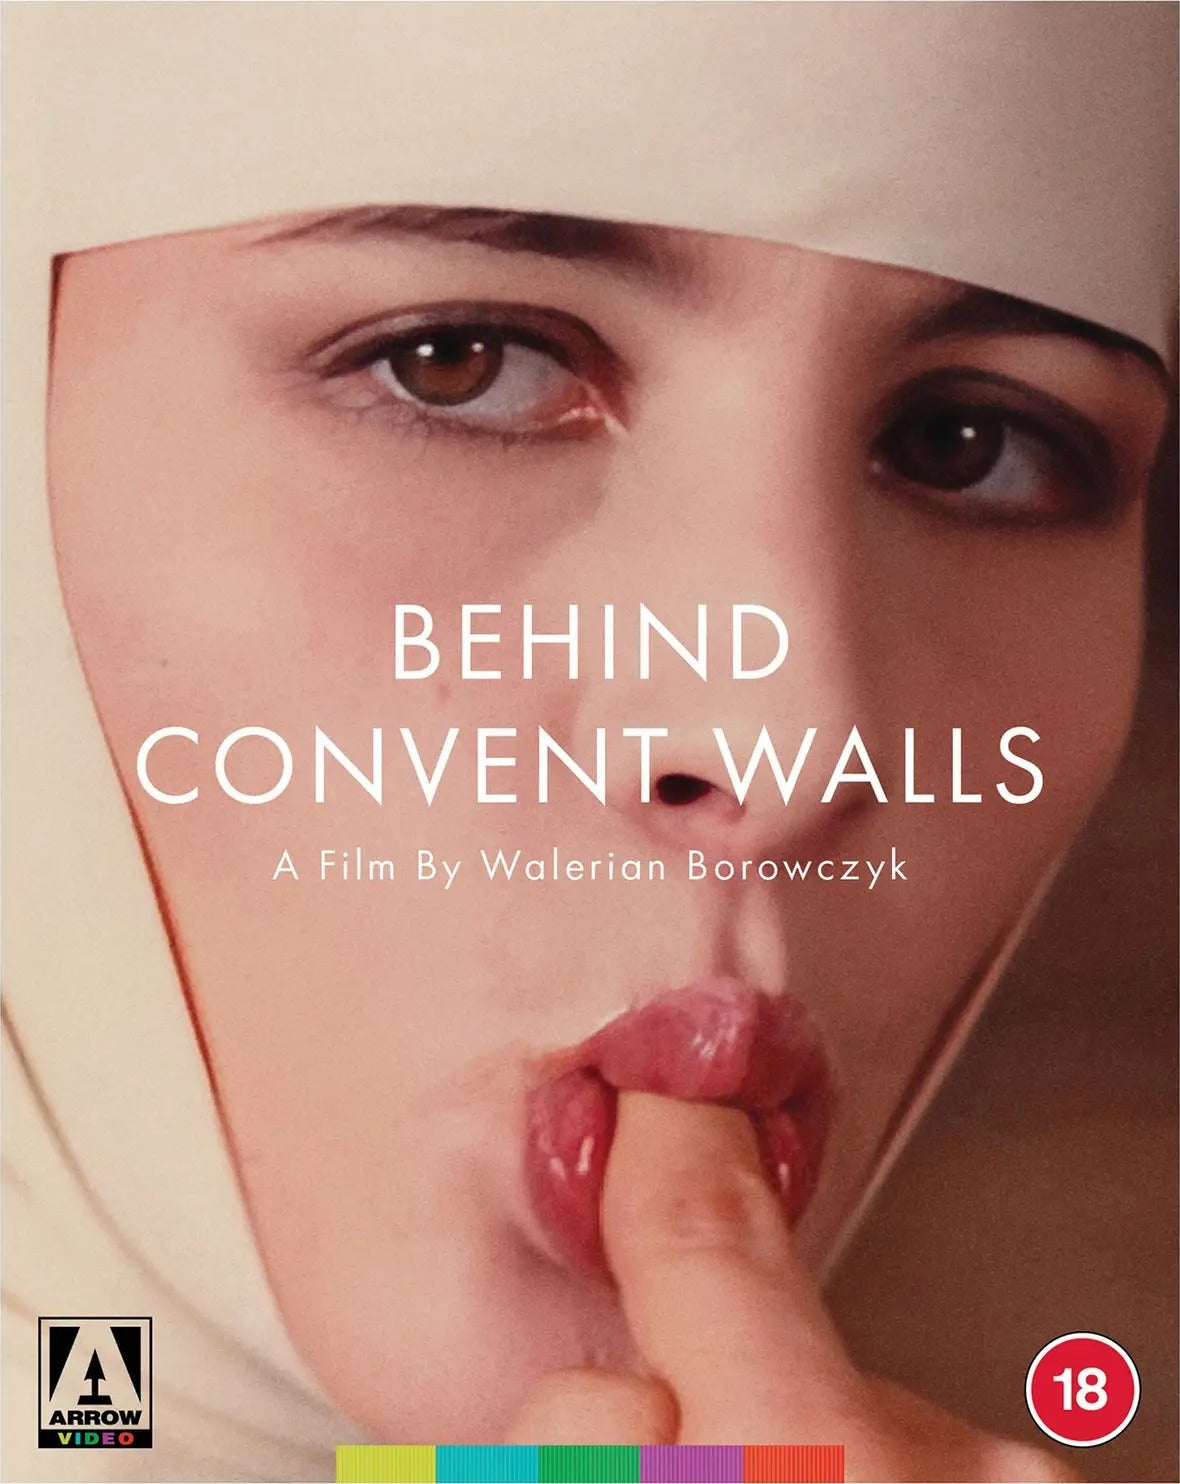 BEHIND CONVENT WALLS (REGION B IMPORT - LIMITED EDITION) BLU-RAY [PRE-ORDER]